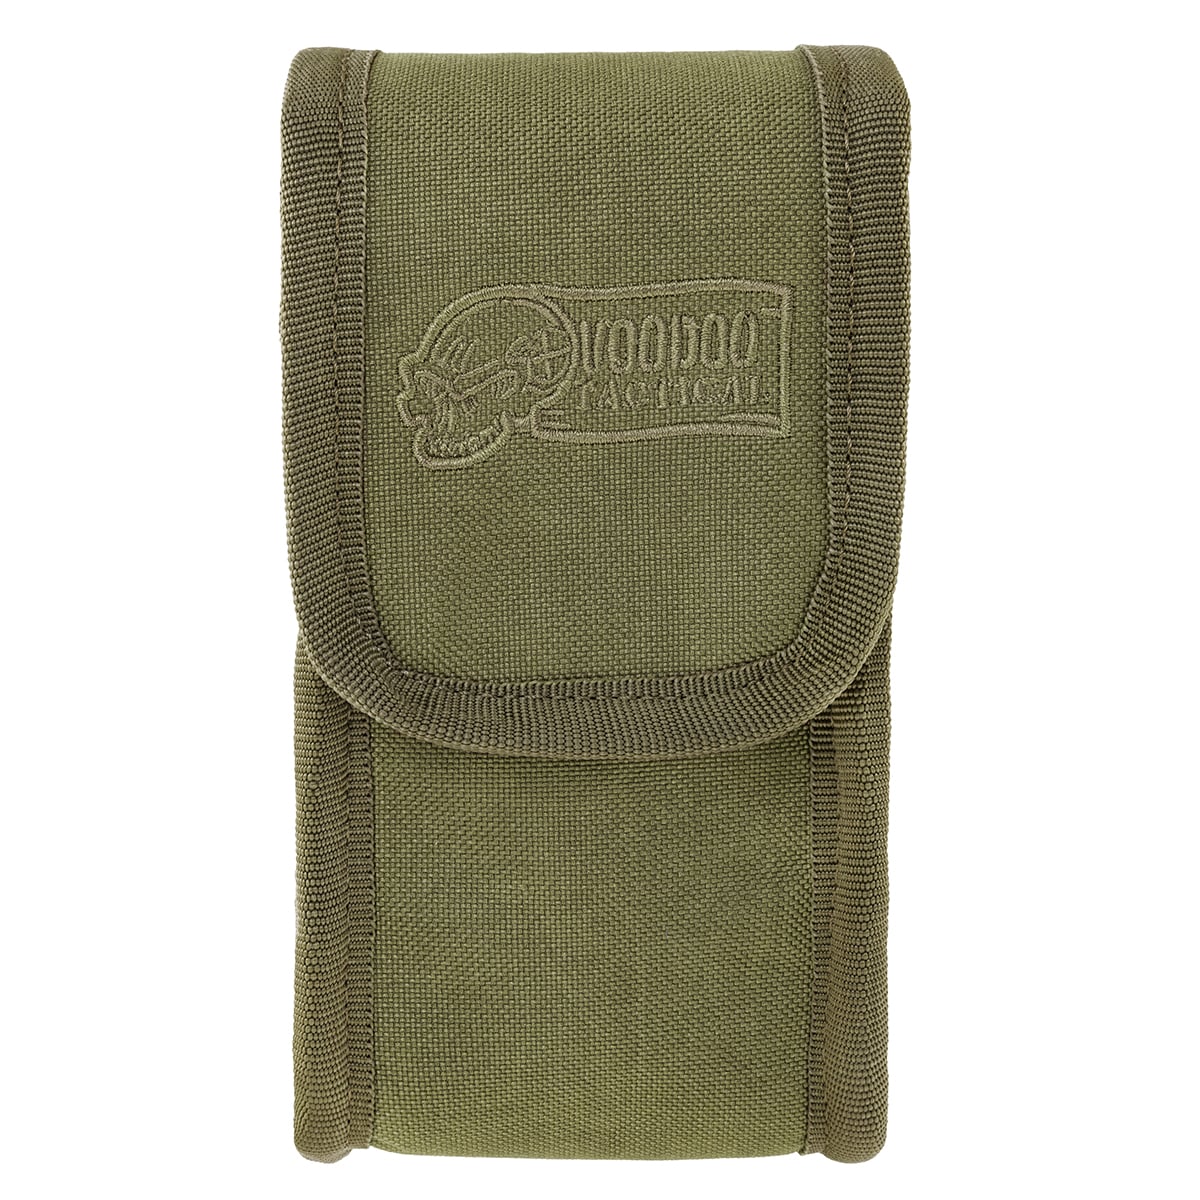 Кишеня Voodoo Tactical Protective Utility Pouch - Olive Drab